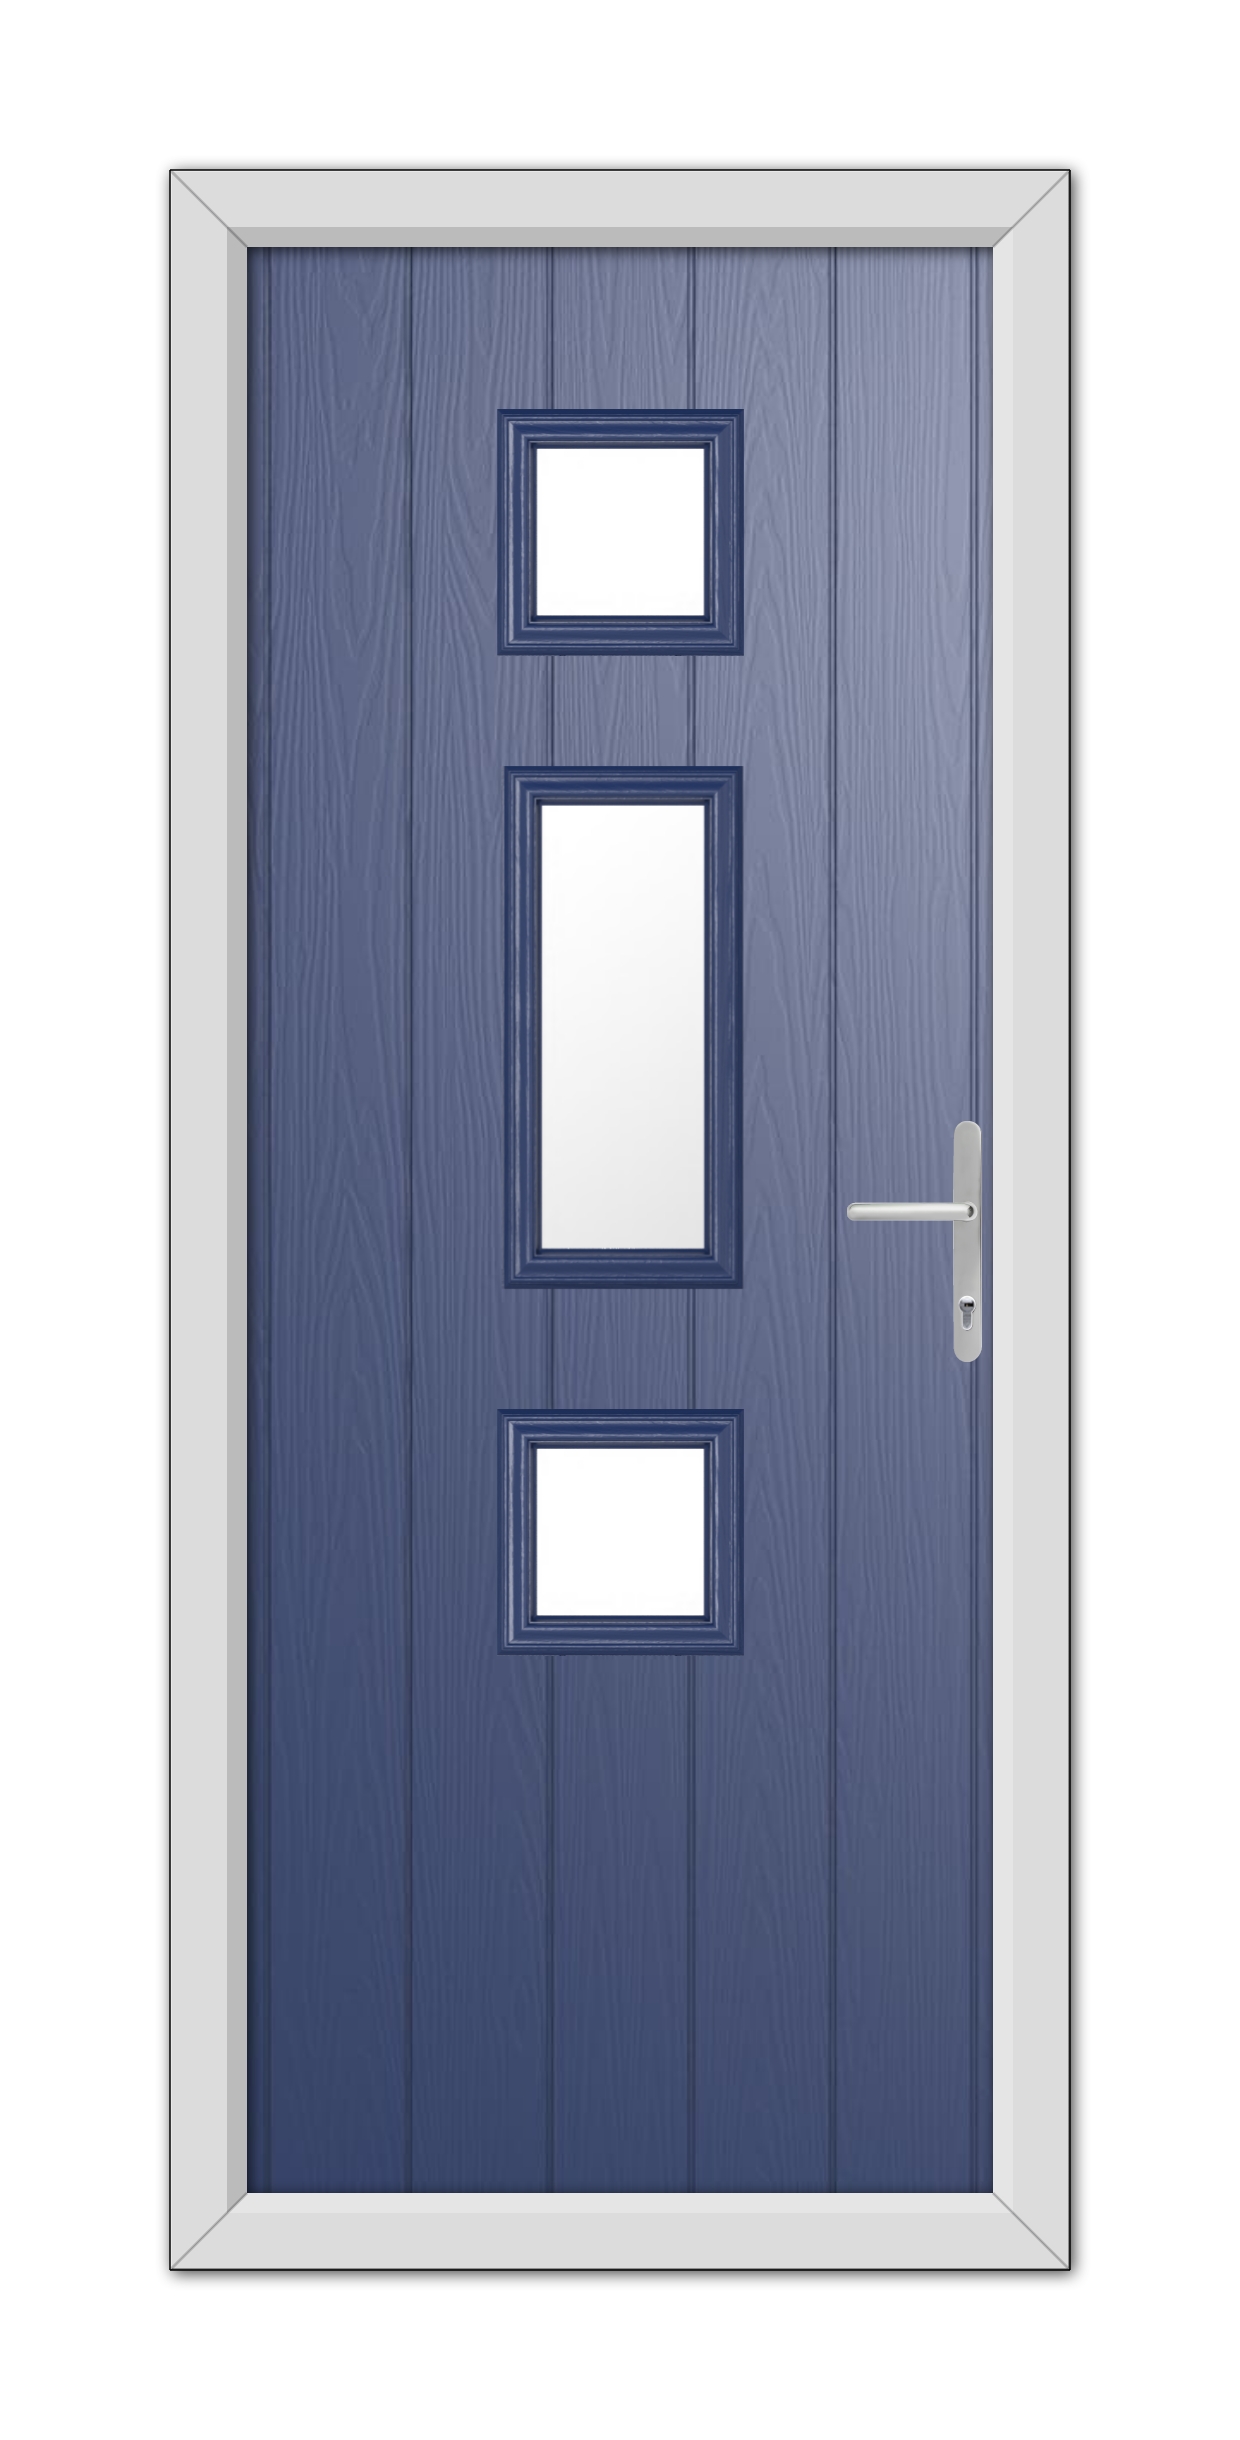 A Blue York Composite Door 48mm Timber Core with three rectangular glass panels and a silver handle, set within a white frame.